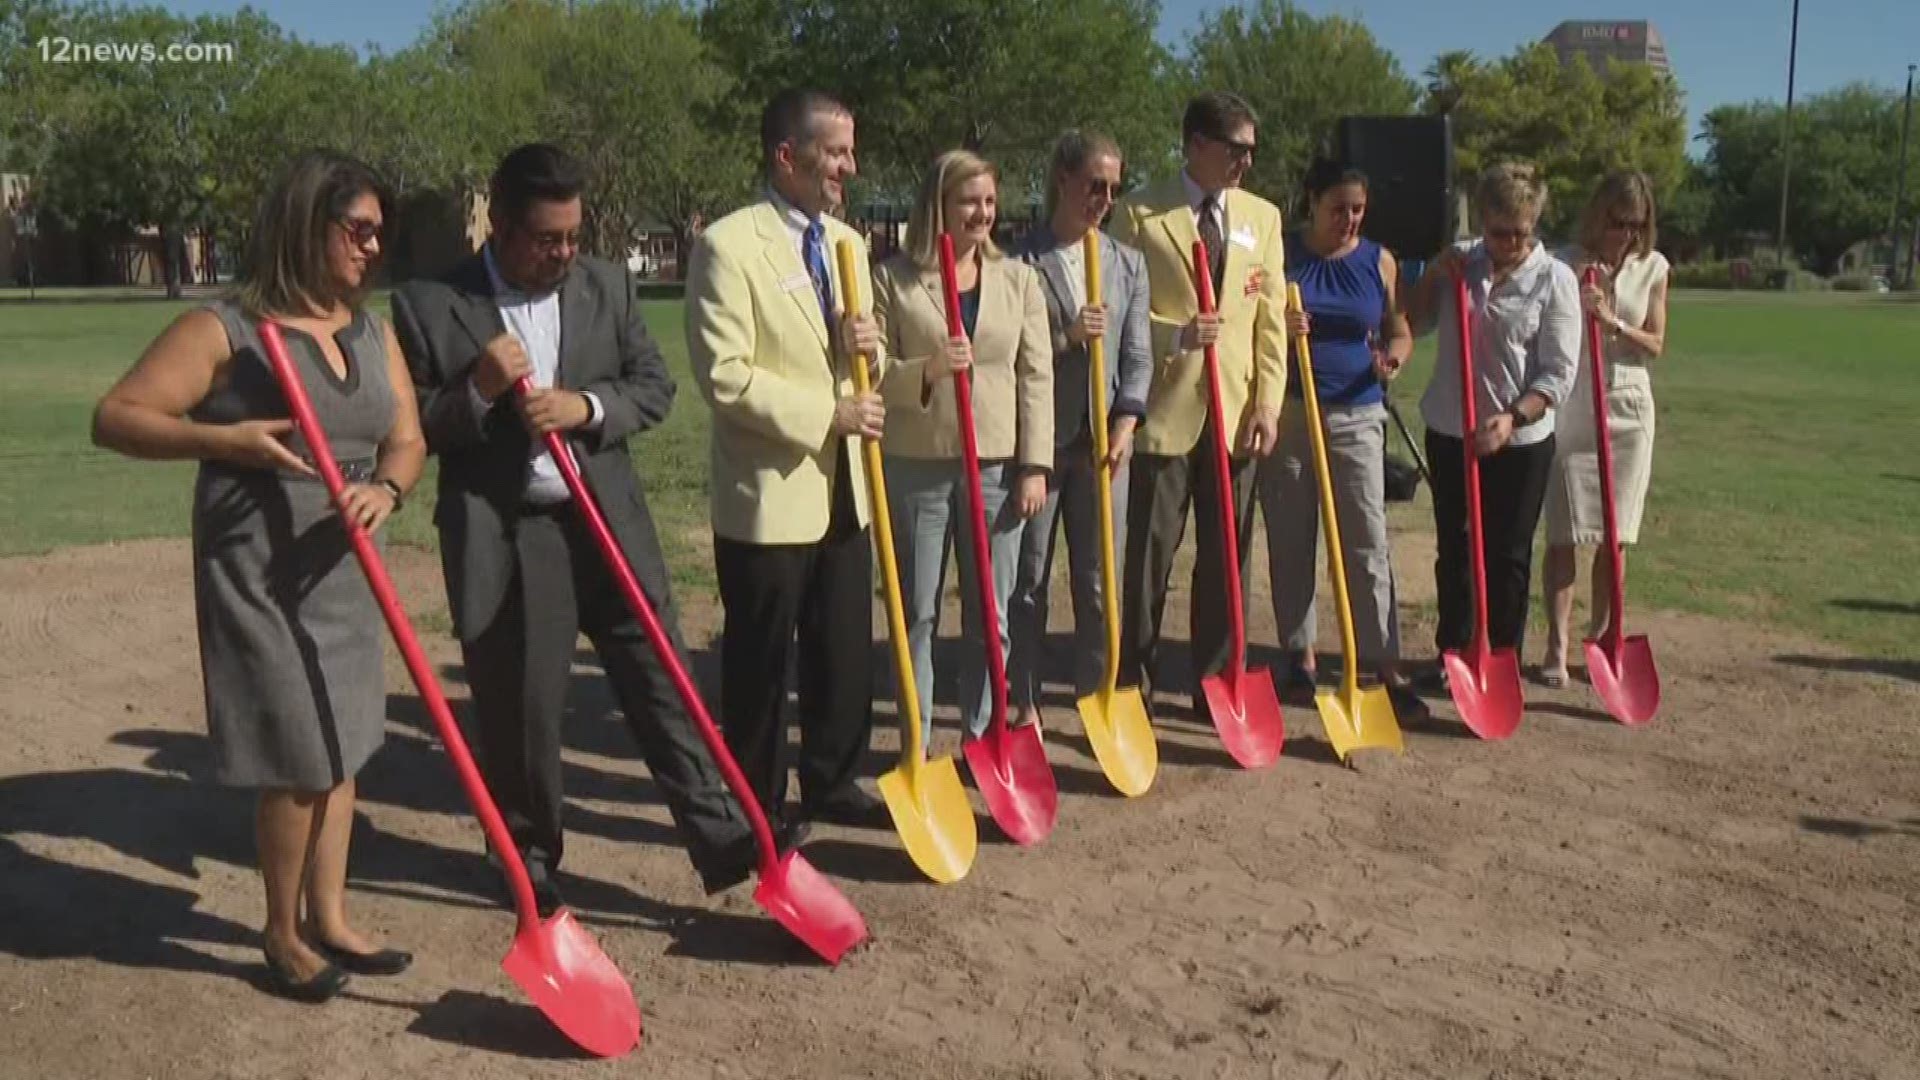 Margaret T. Hance Park is getting $2 million to revitalize the park, including a brand new playground for kids. The money is coming from sponsorship through the Fiesta Bowl.